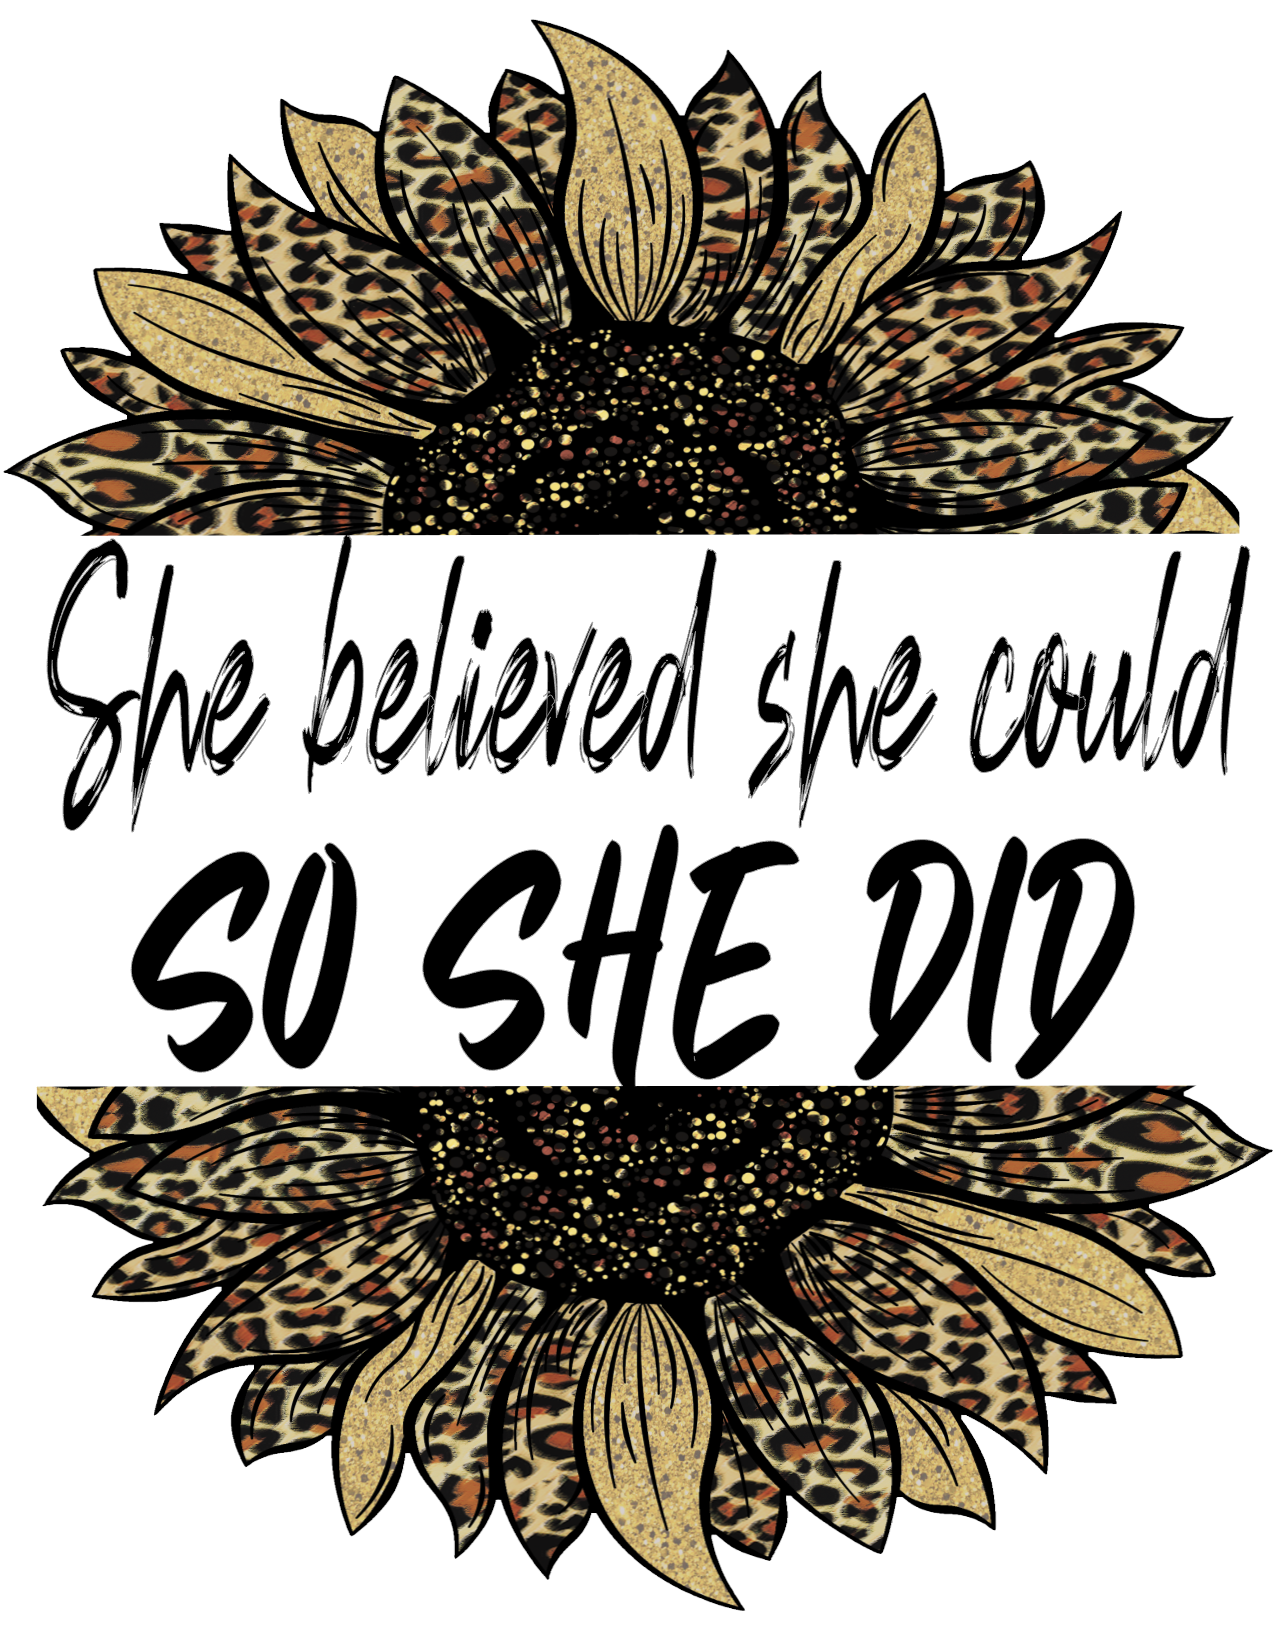 #161 She believed she could So She Did (Leopard)